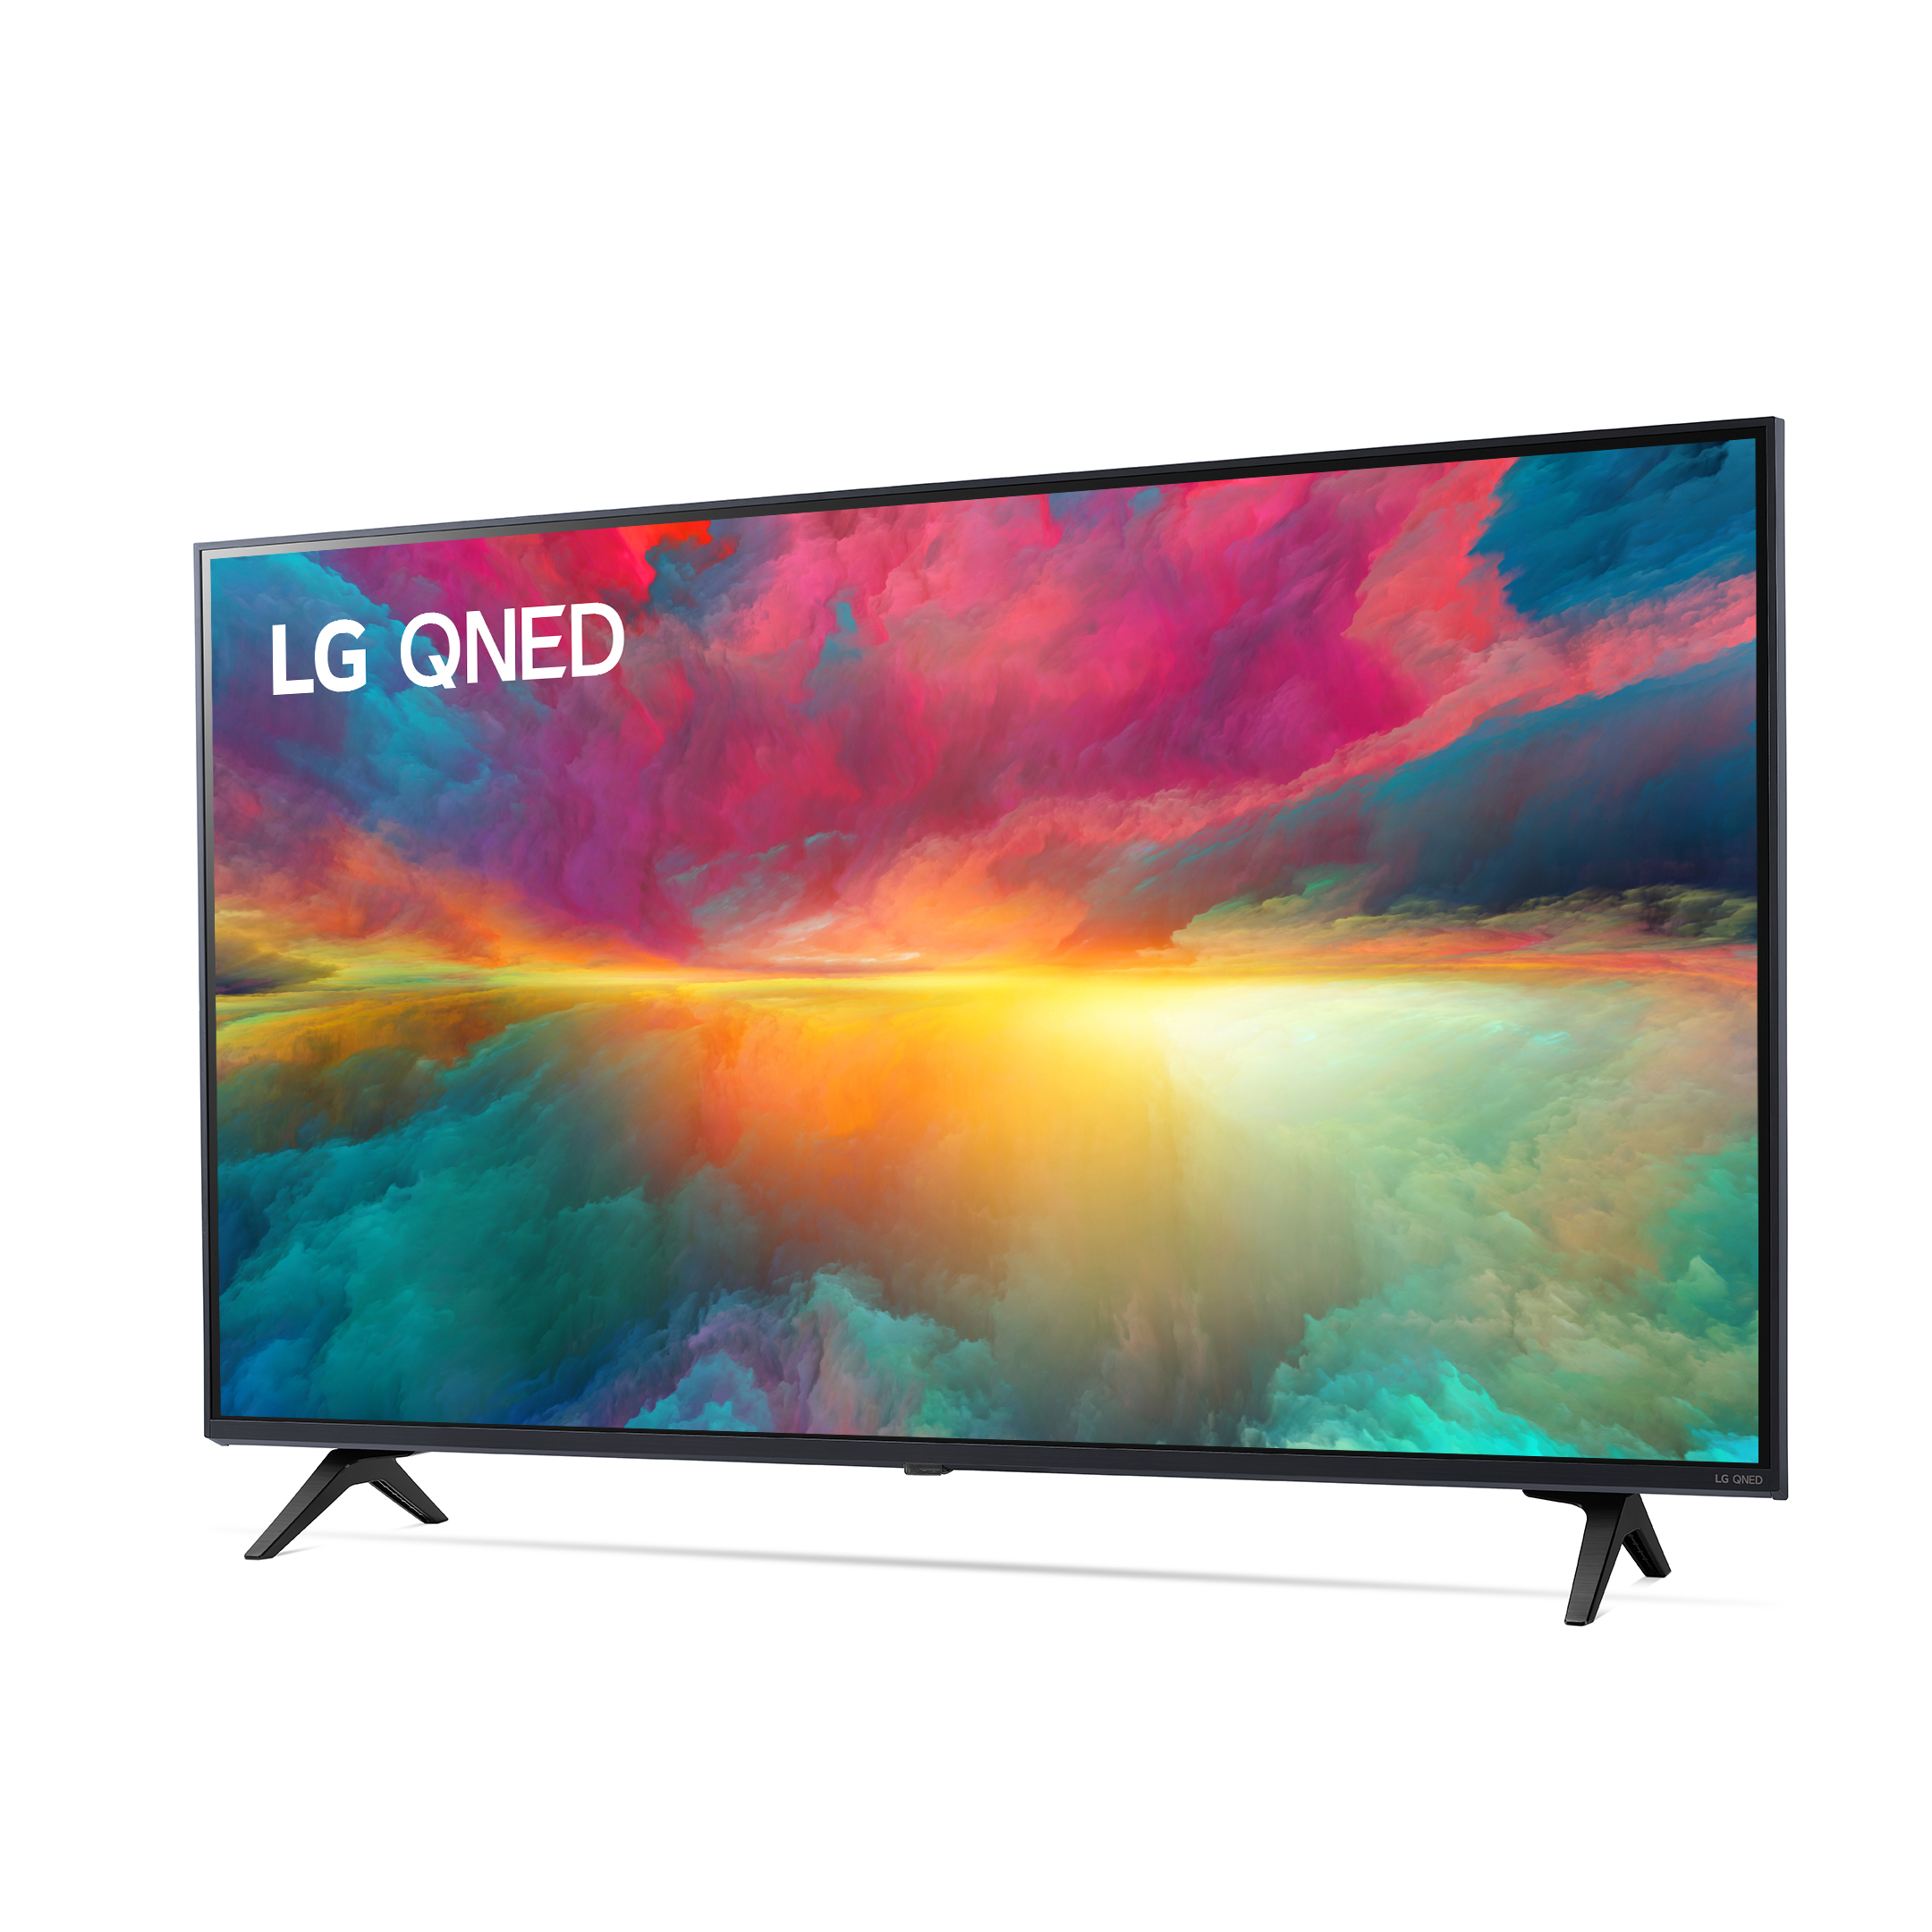 Image of LG QNED 43'' Serie QNED75 43QNED756RA, TV 4K, 3 HDMI, SMART TV Televisore 2023